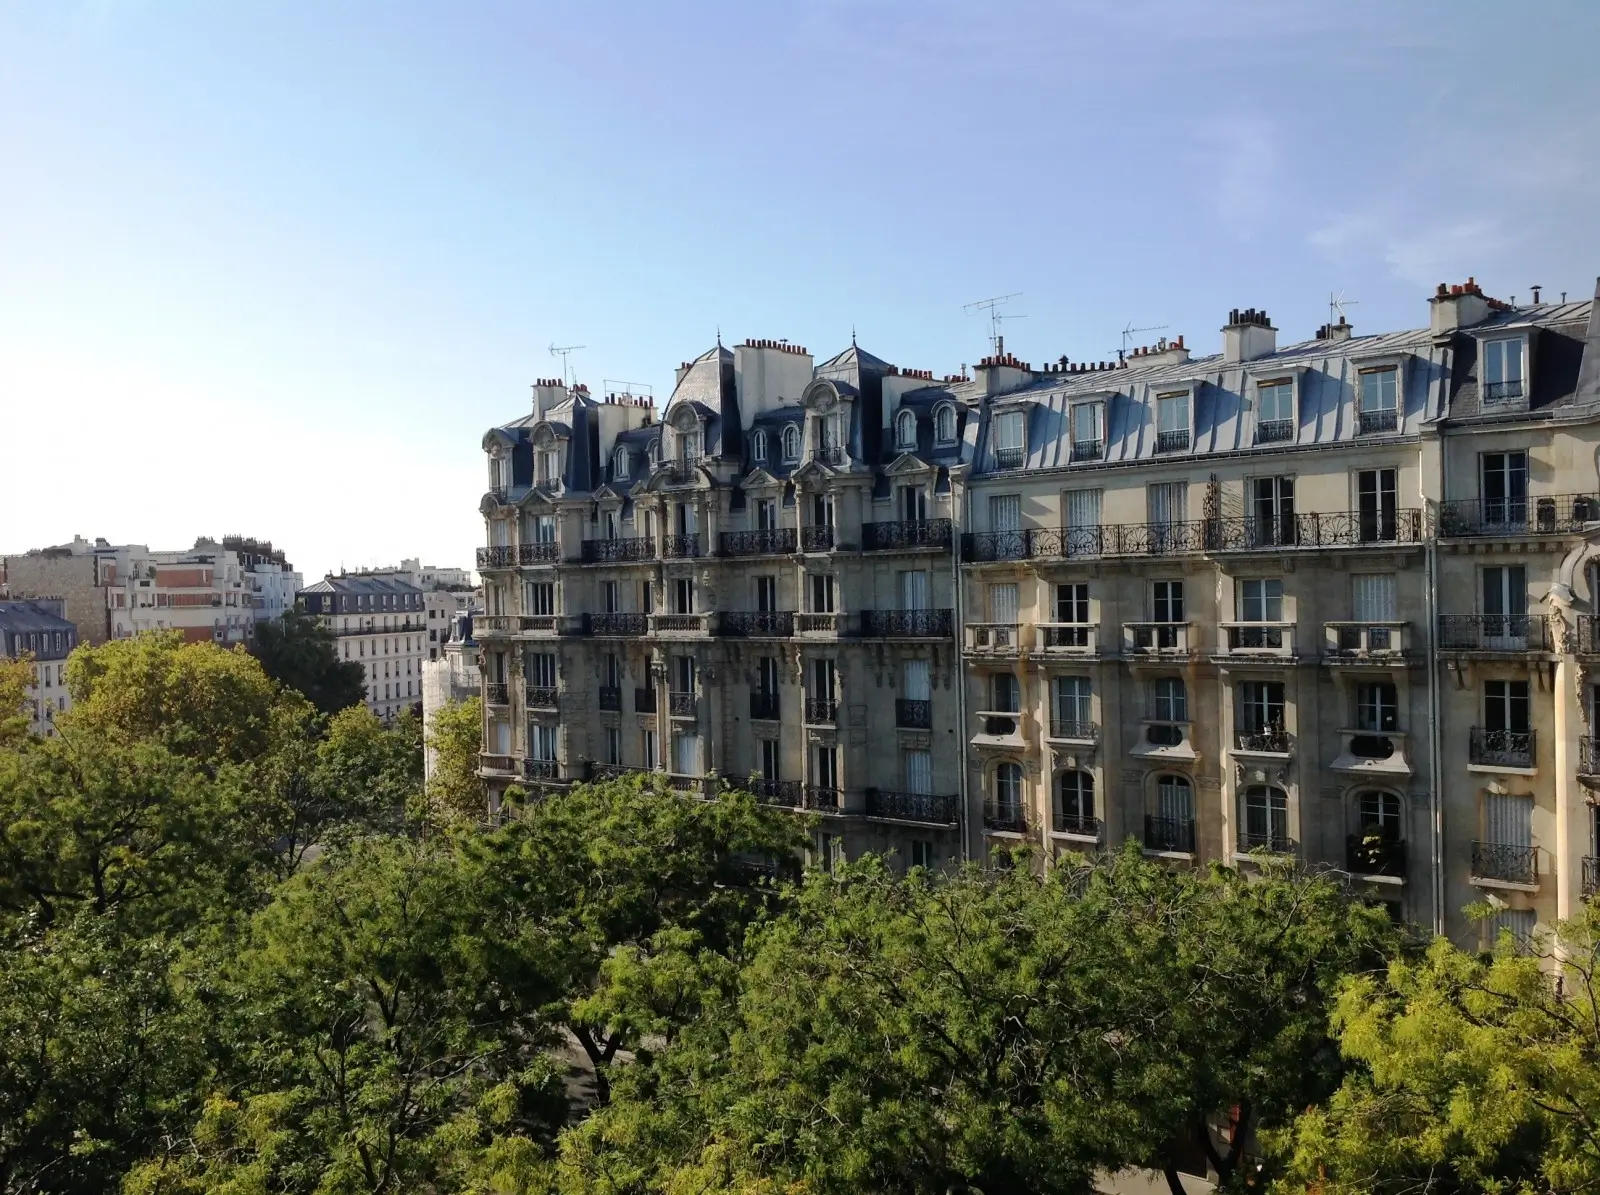 Classic Parisian architecture framed by lush greenery, as viewed from Hotel du Printemps in Paris, showcasing the harmonious blend of historic urban charm and verdant nature.